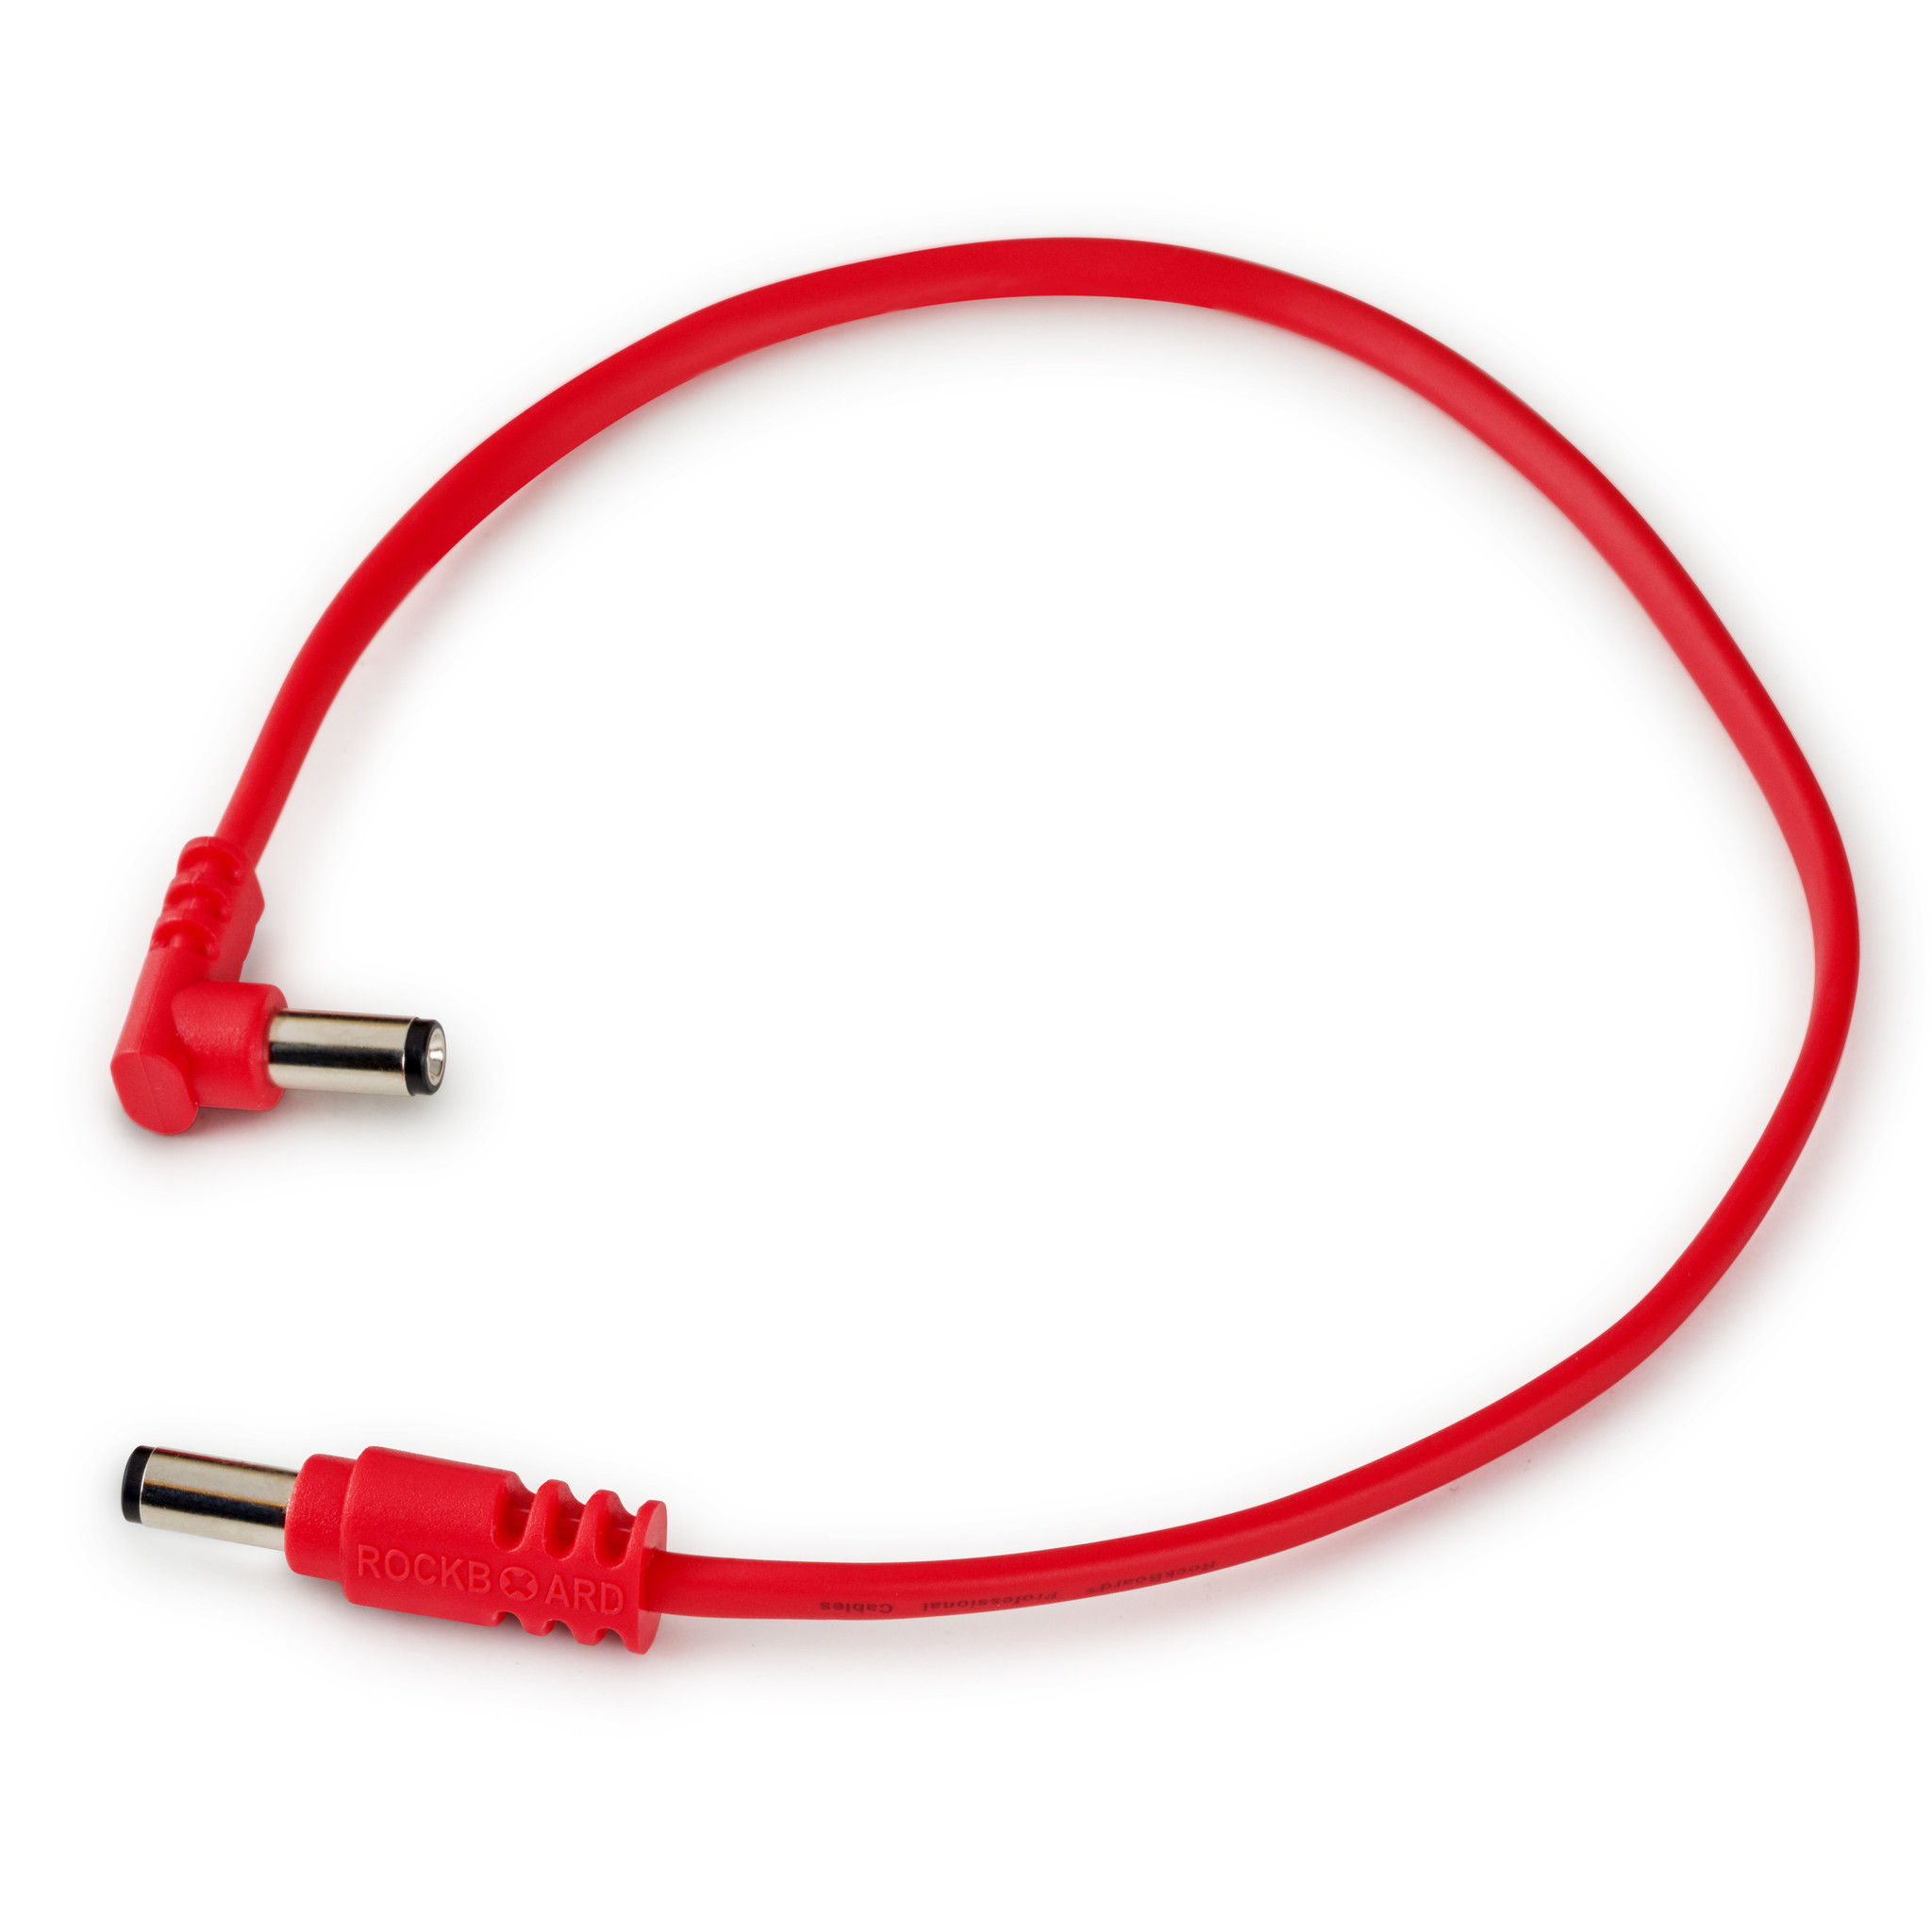 Rockboard Flat Polarity Reverser Cable, 11.81” , angled/straight, red